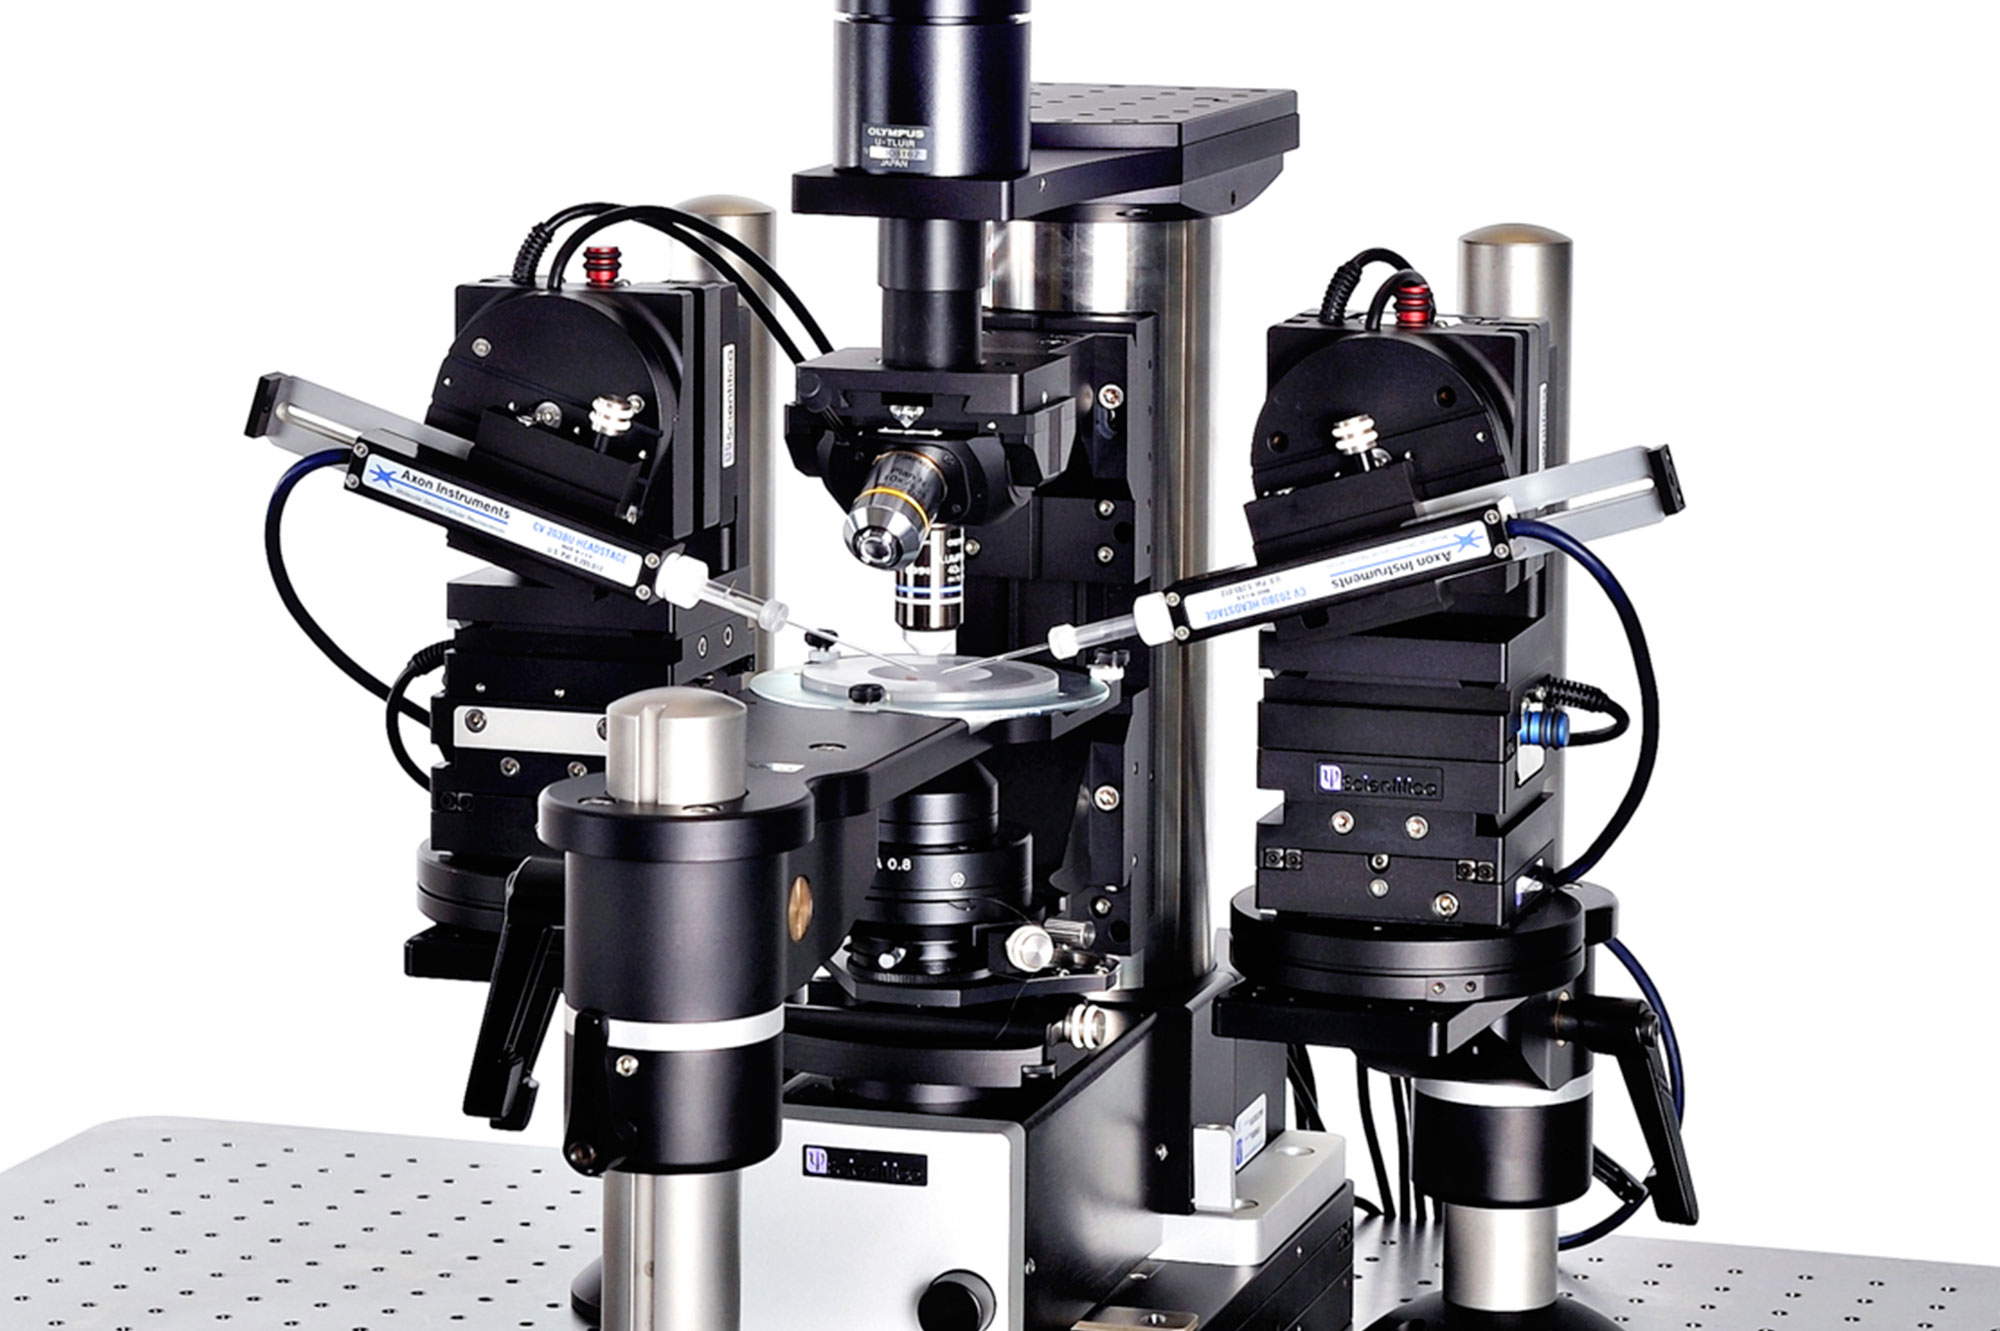 Scientifica are experts at providing complete imaging and electrophysiology rigs.